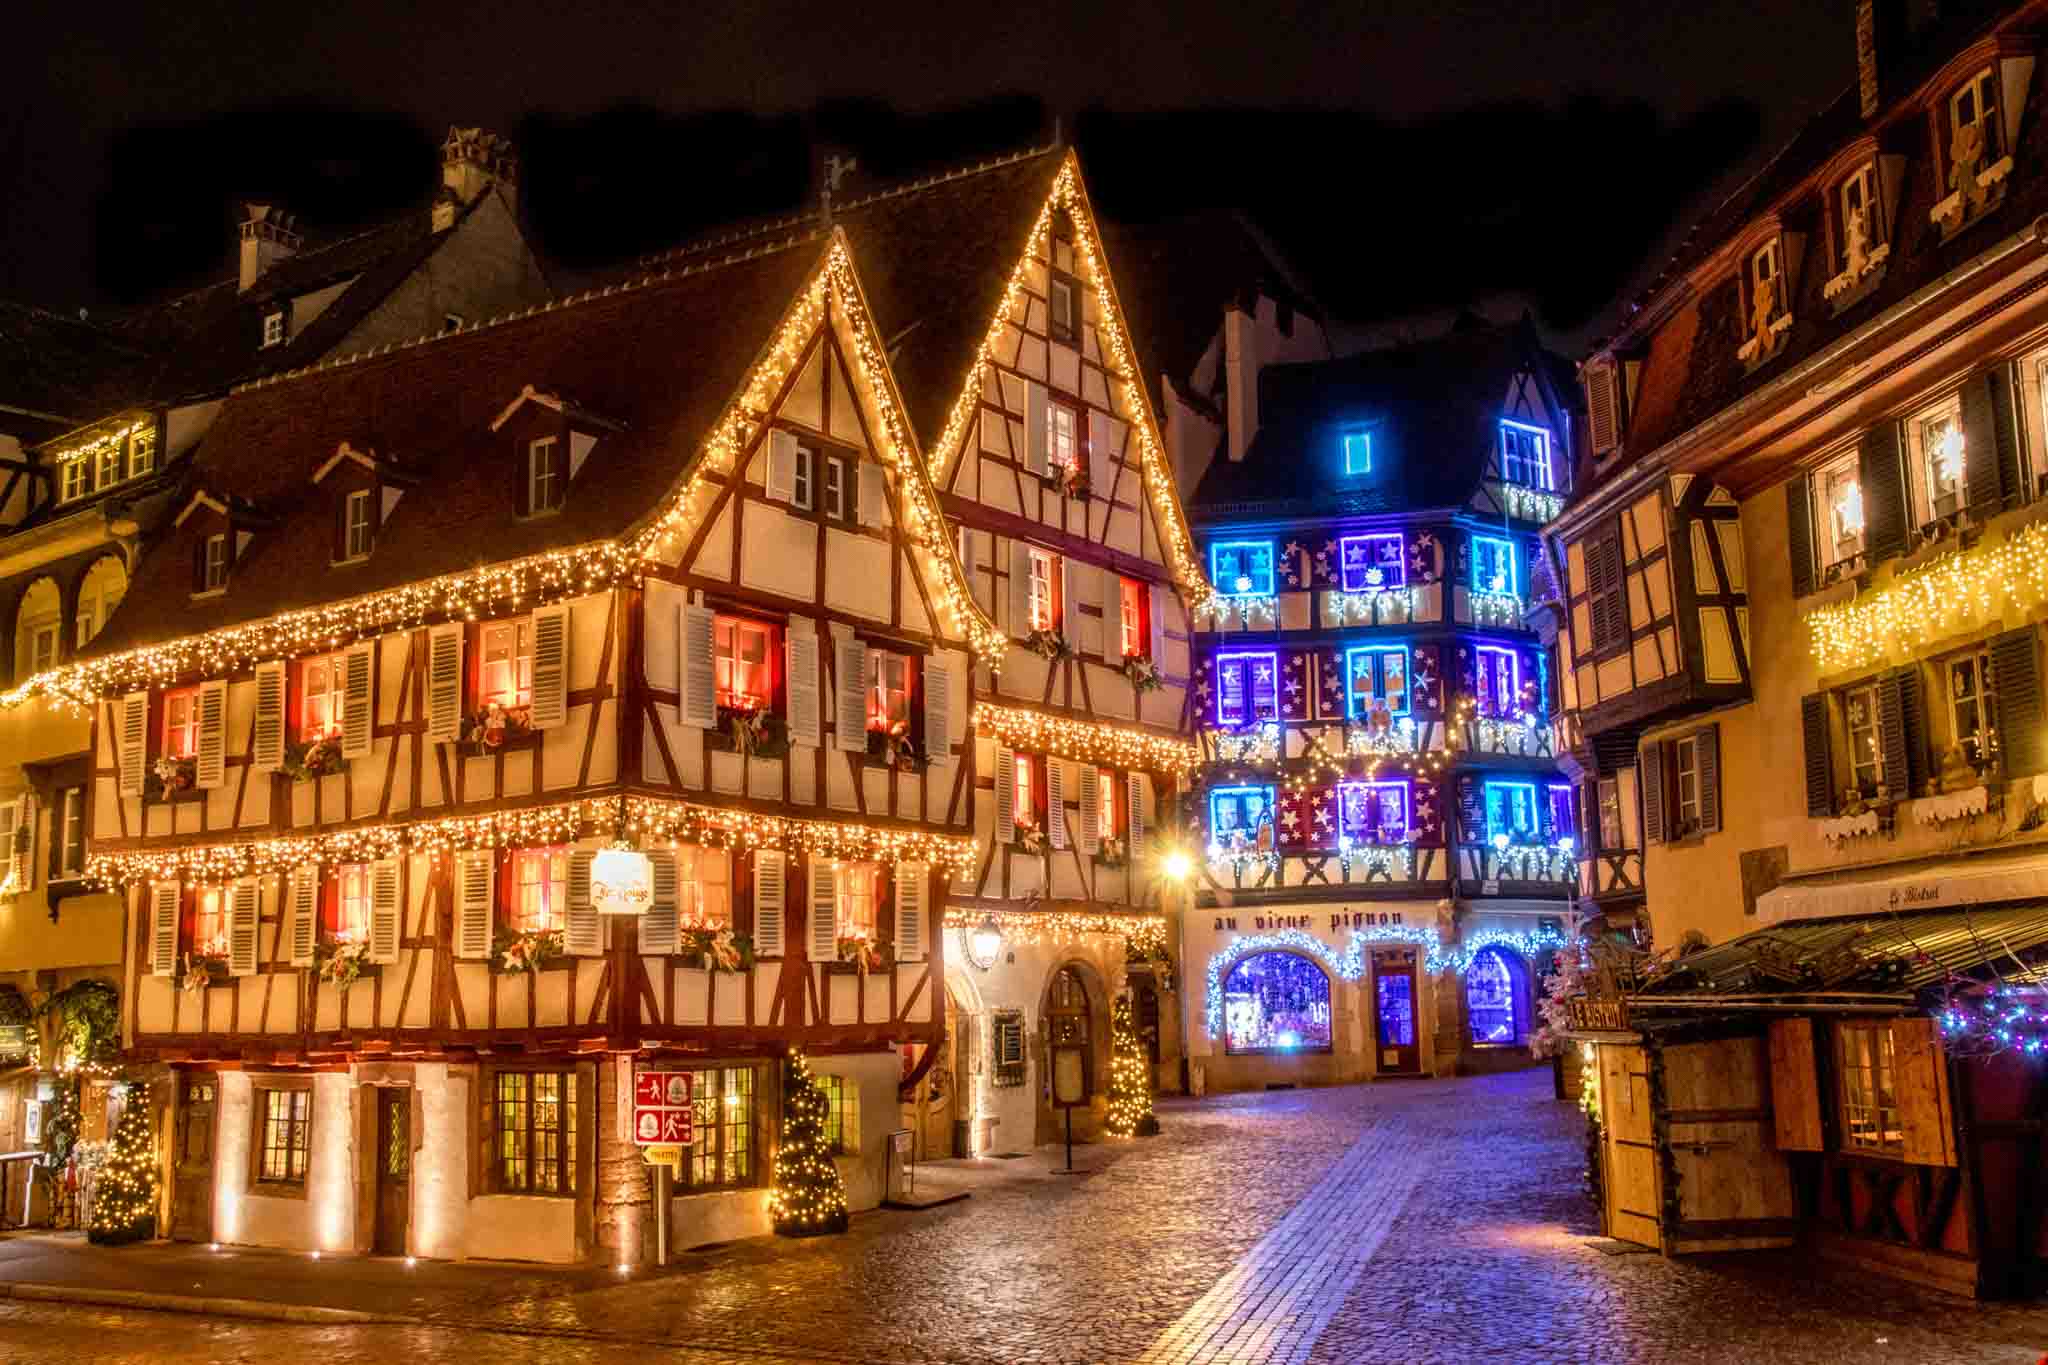 17 Fabulous Things to Do in Colmar France (+ Tips and Photos)